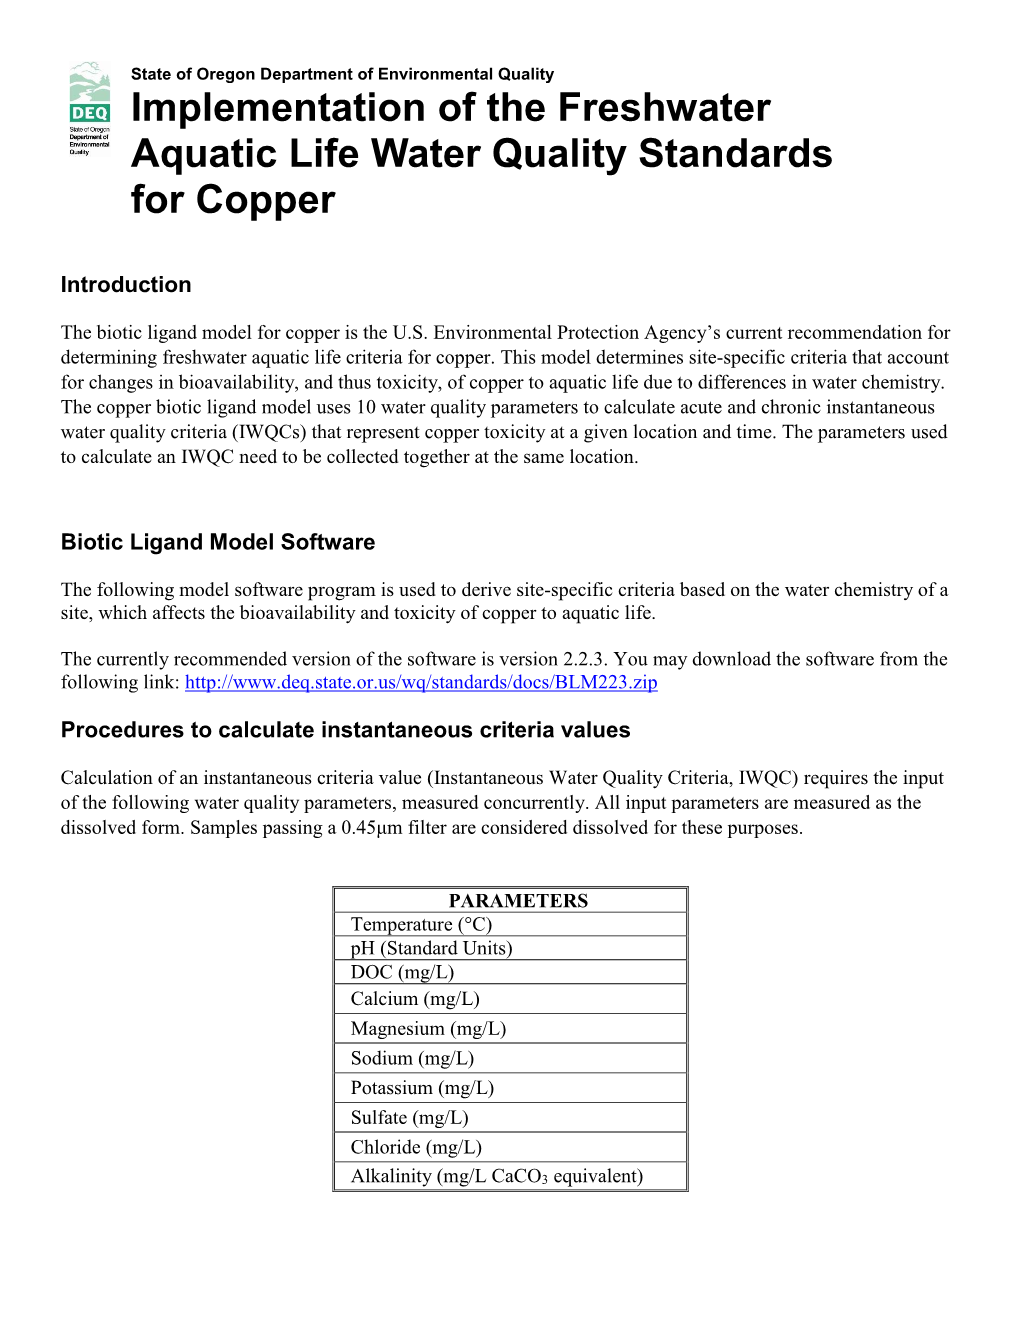 Implementation of the Freshwater Aquatic Life Water Quality Standards for Copper